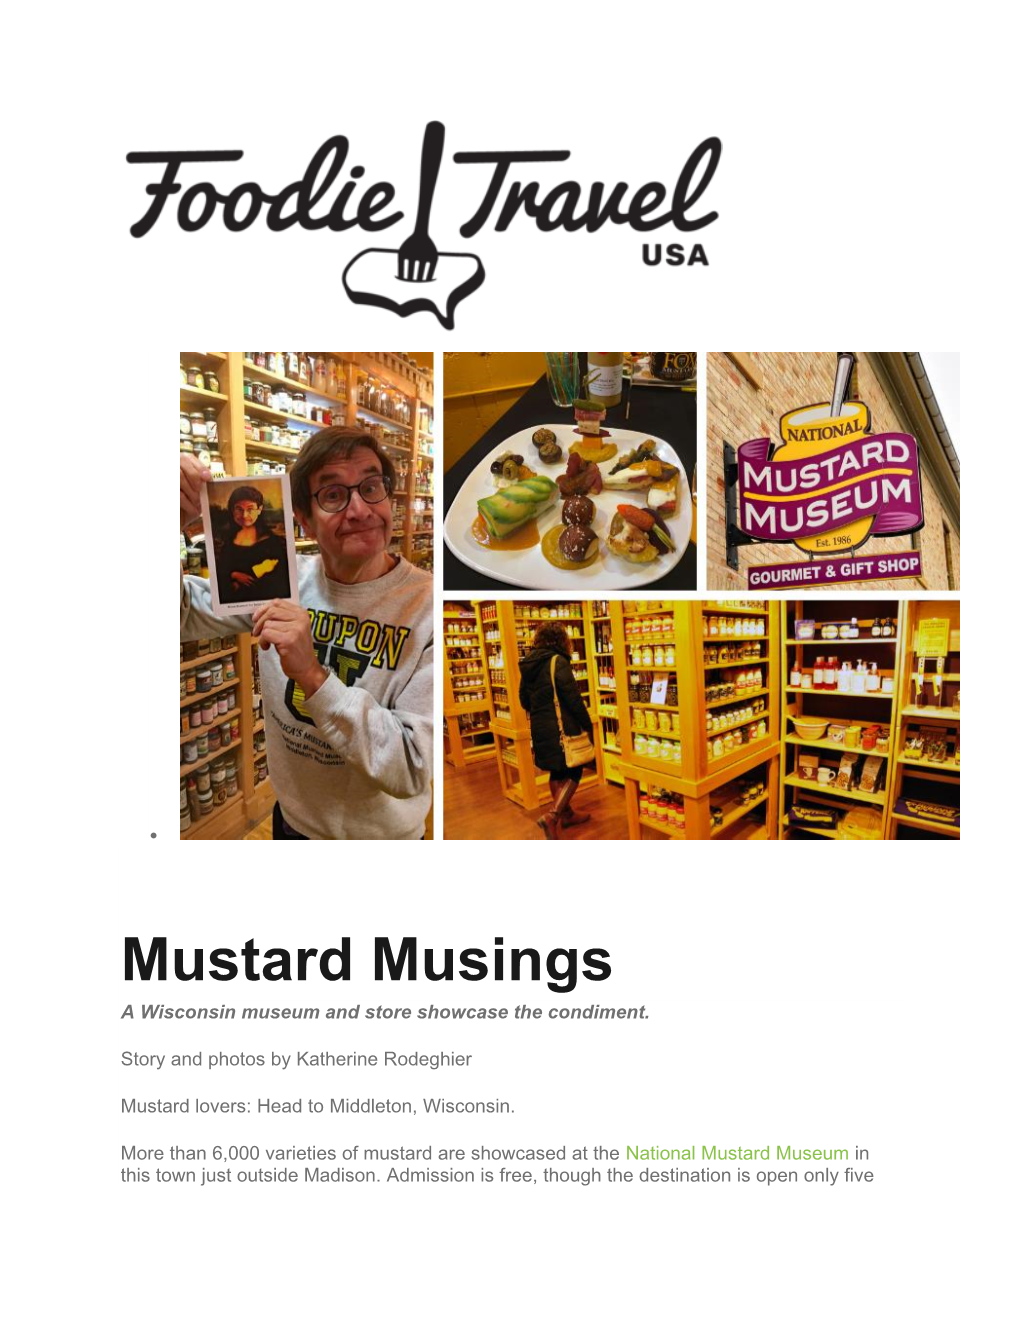 Mustard Musings a Wisconsin Museum and Store Showcase the Condiment